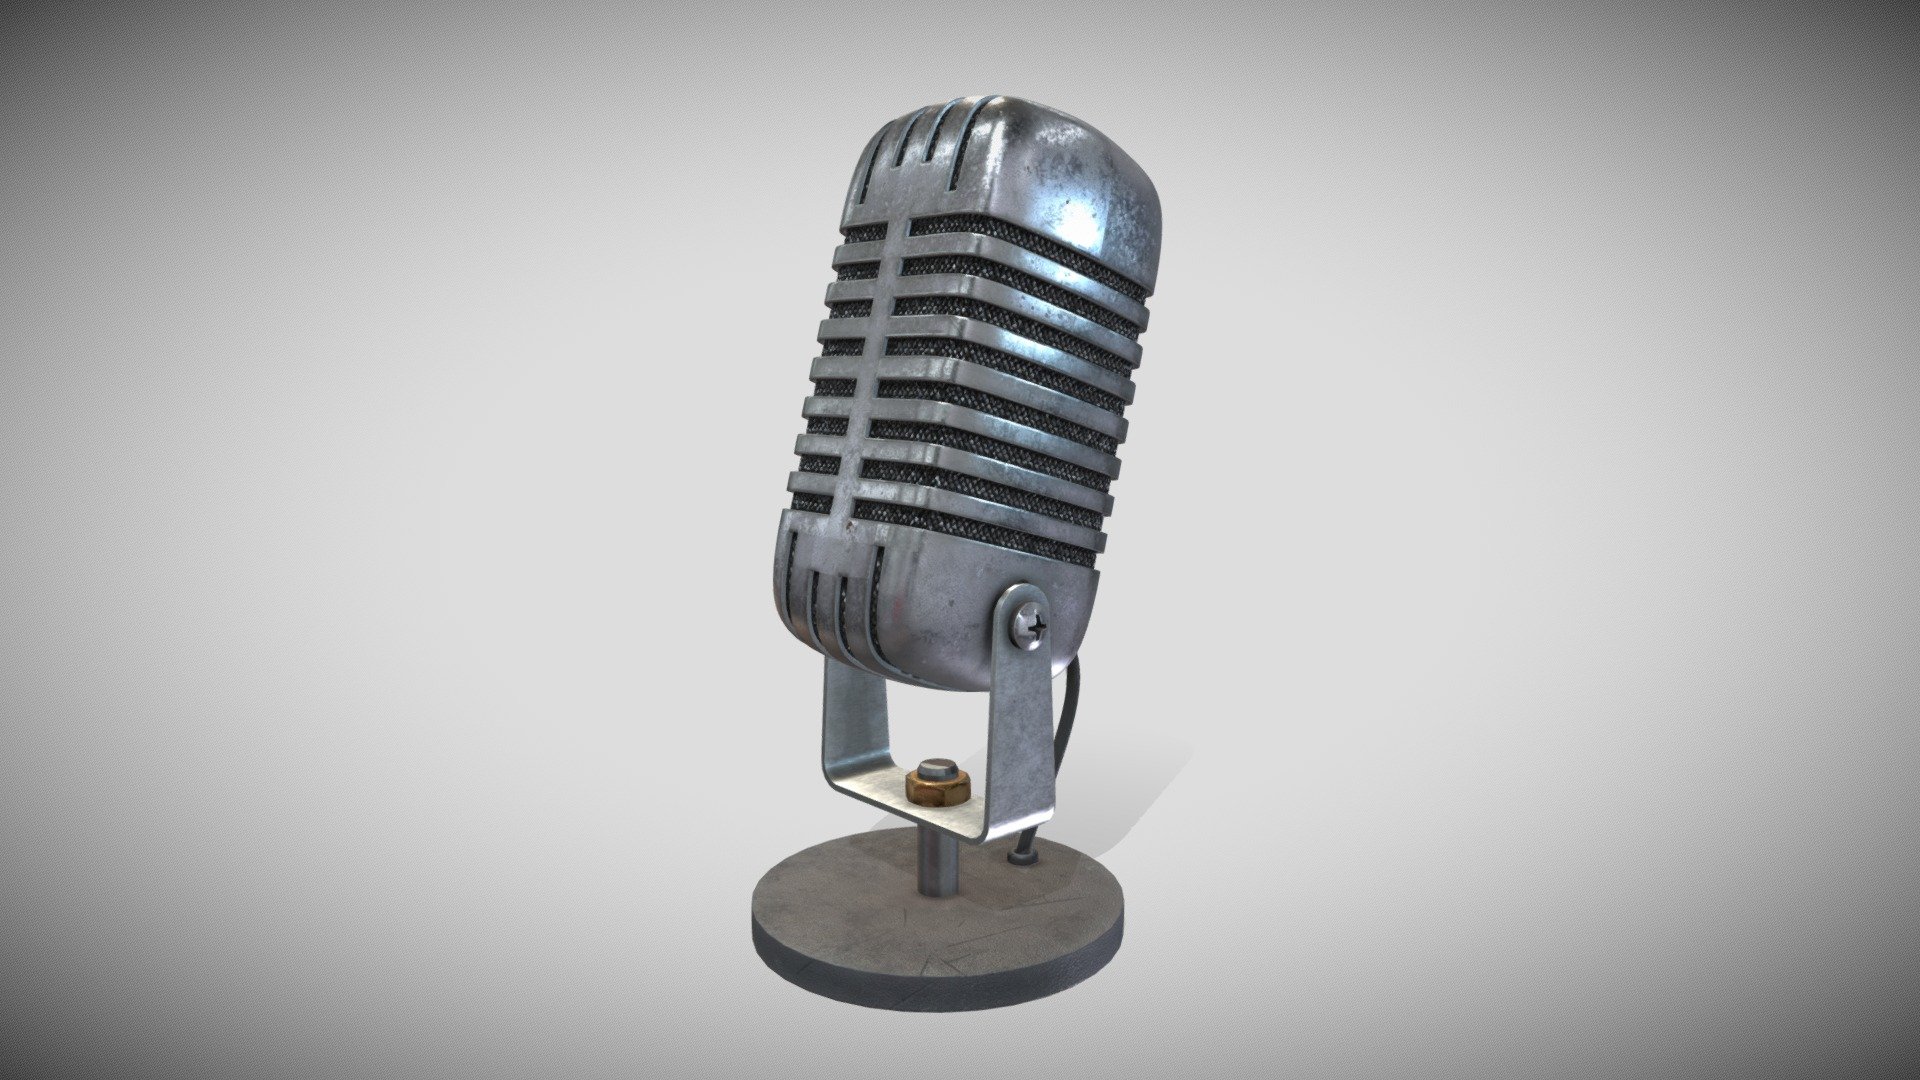 One Material PBR Metalness 4k

High Poly, mainly Quads - Old Microphone - Squadro_Mic - Buy Royalty Free 3D model by Francesco Coldesina (@topfrank2013) 3d model